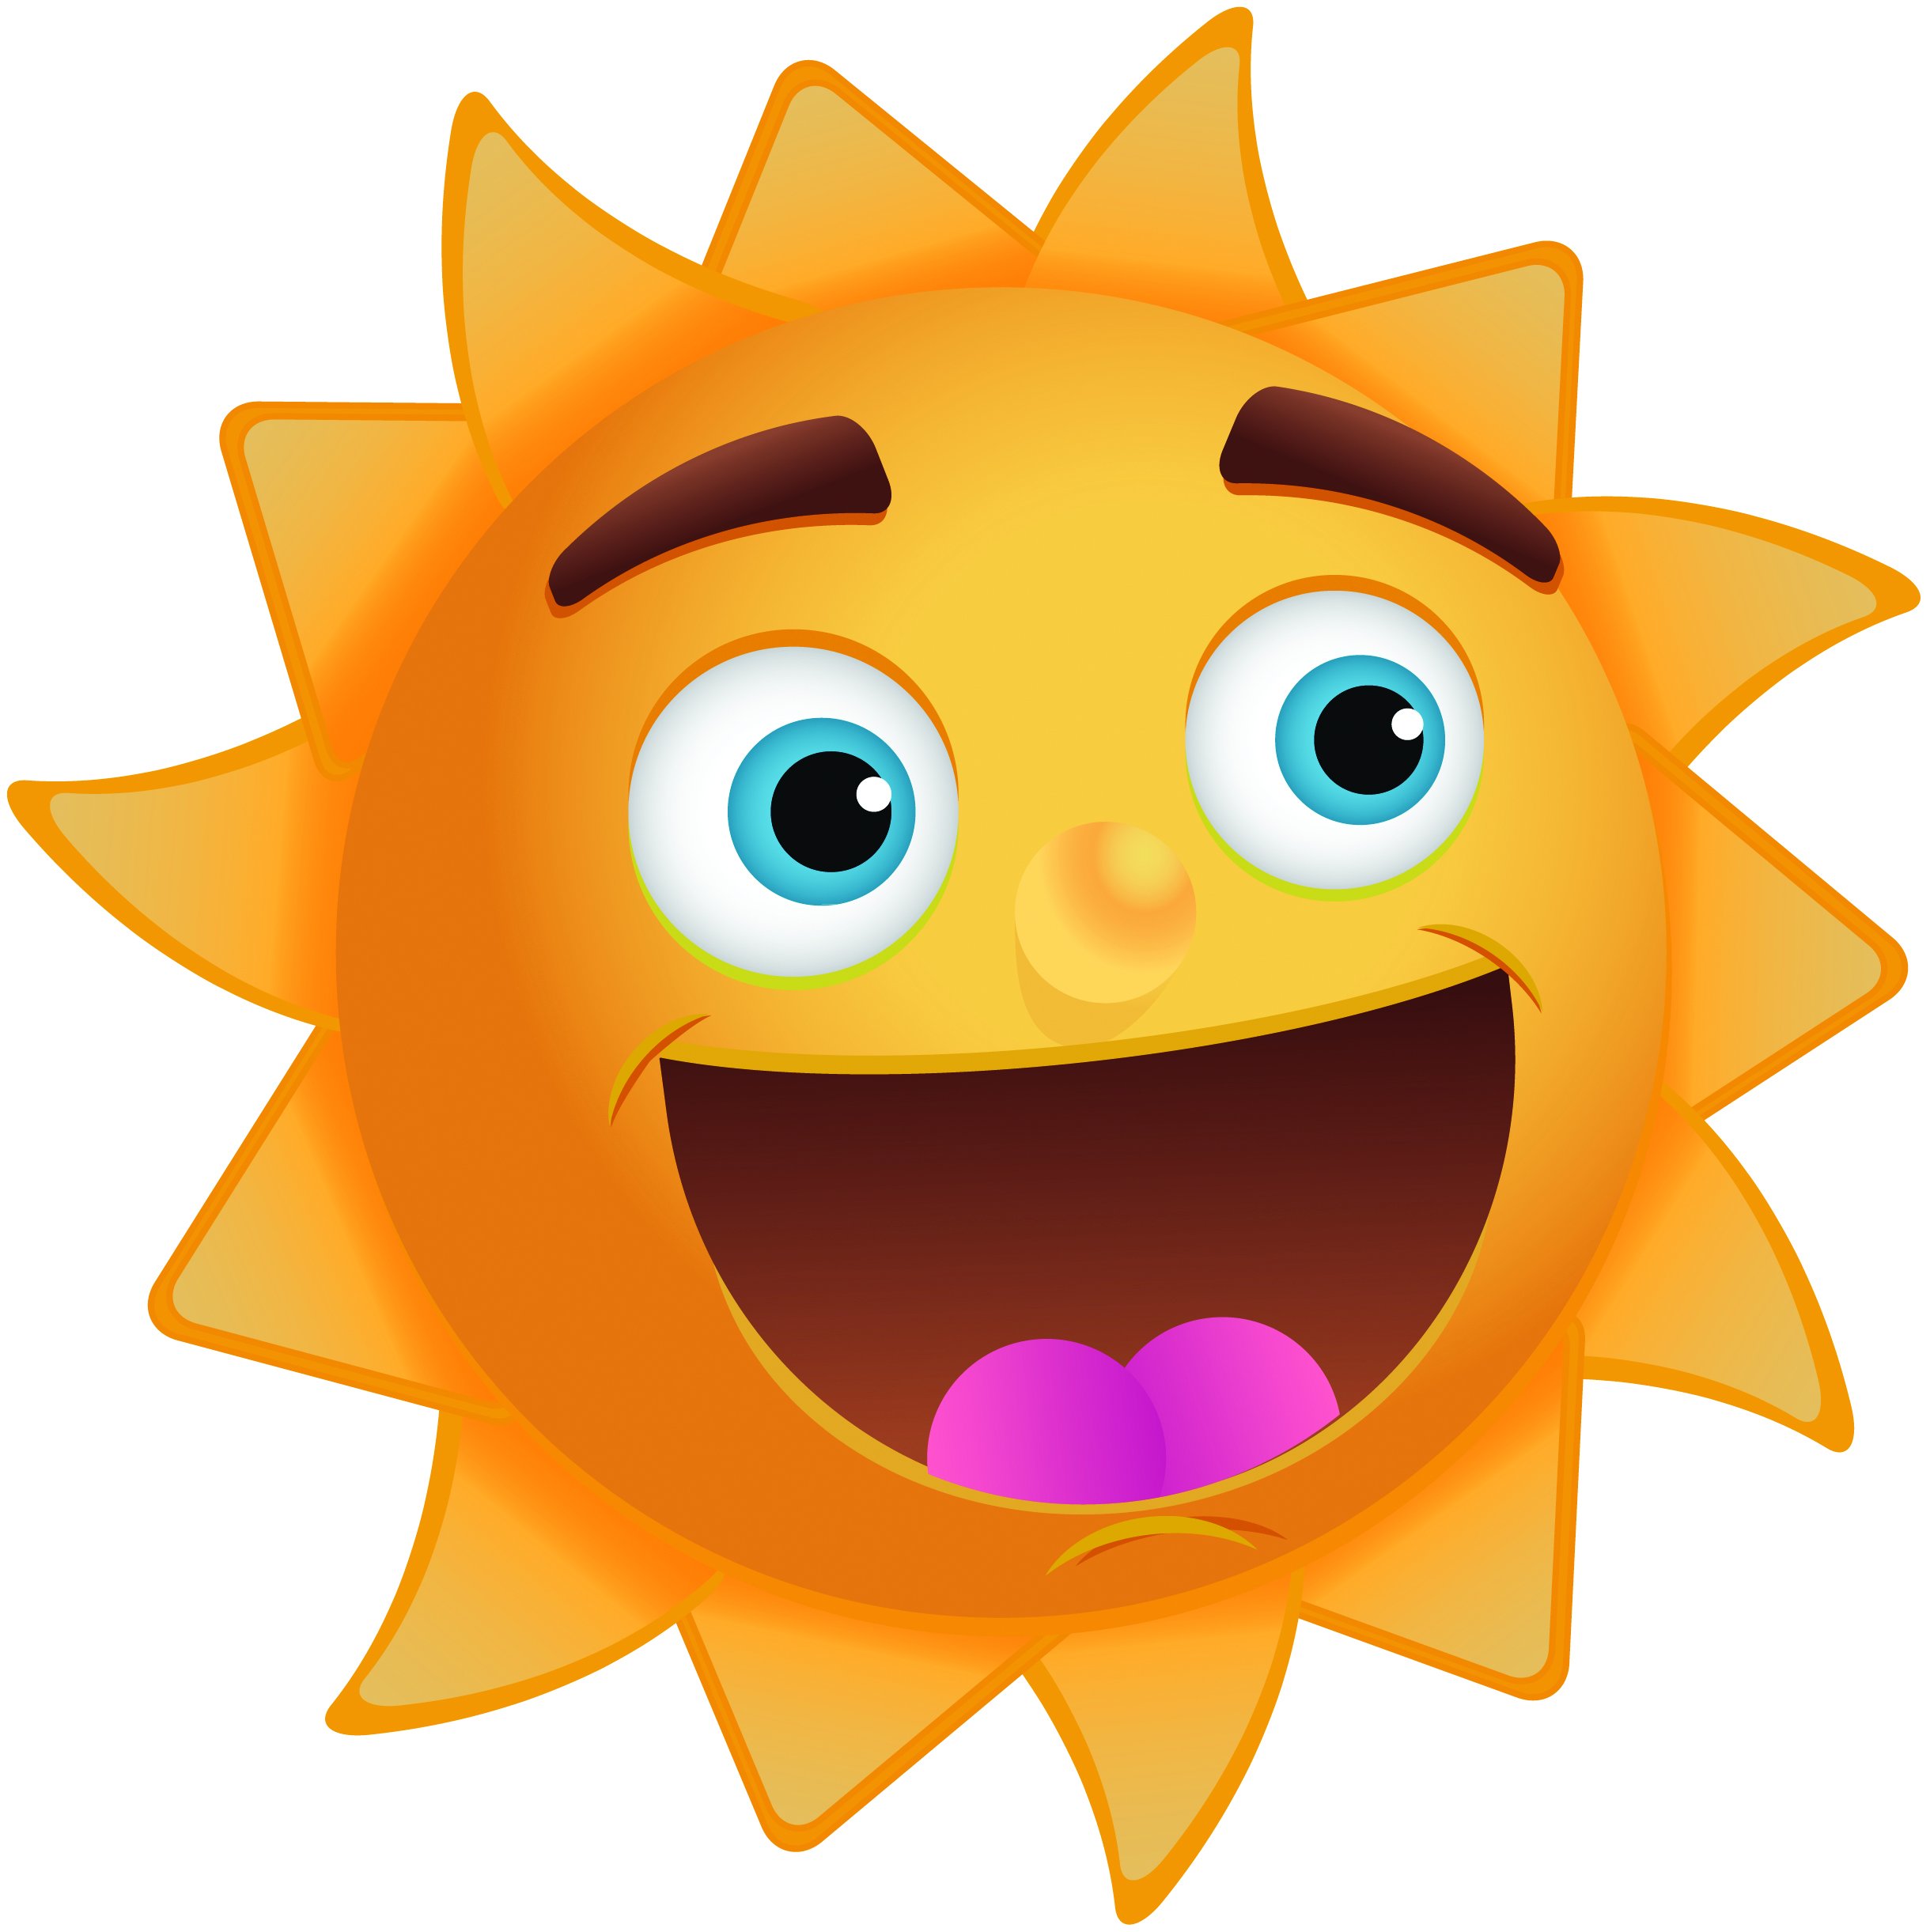 Happy Sun Clip Art Image With Great Big Smile Kootation - ClipArt ...